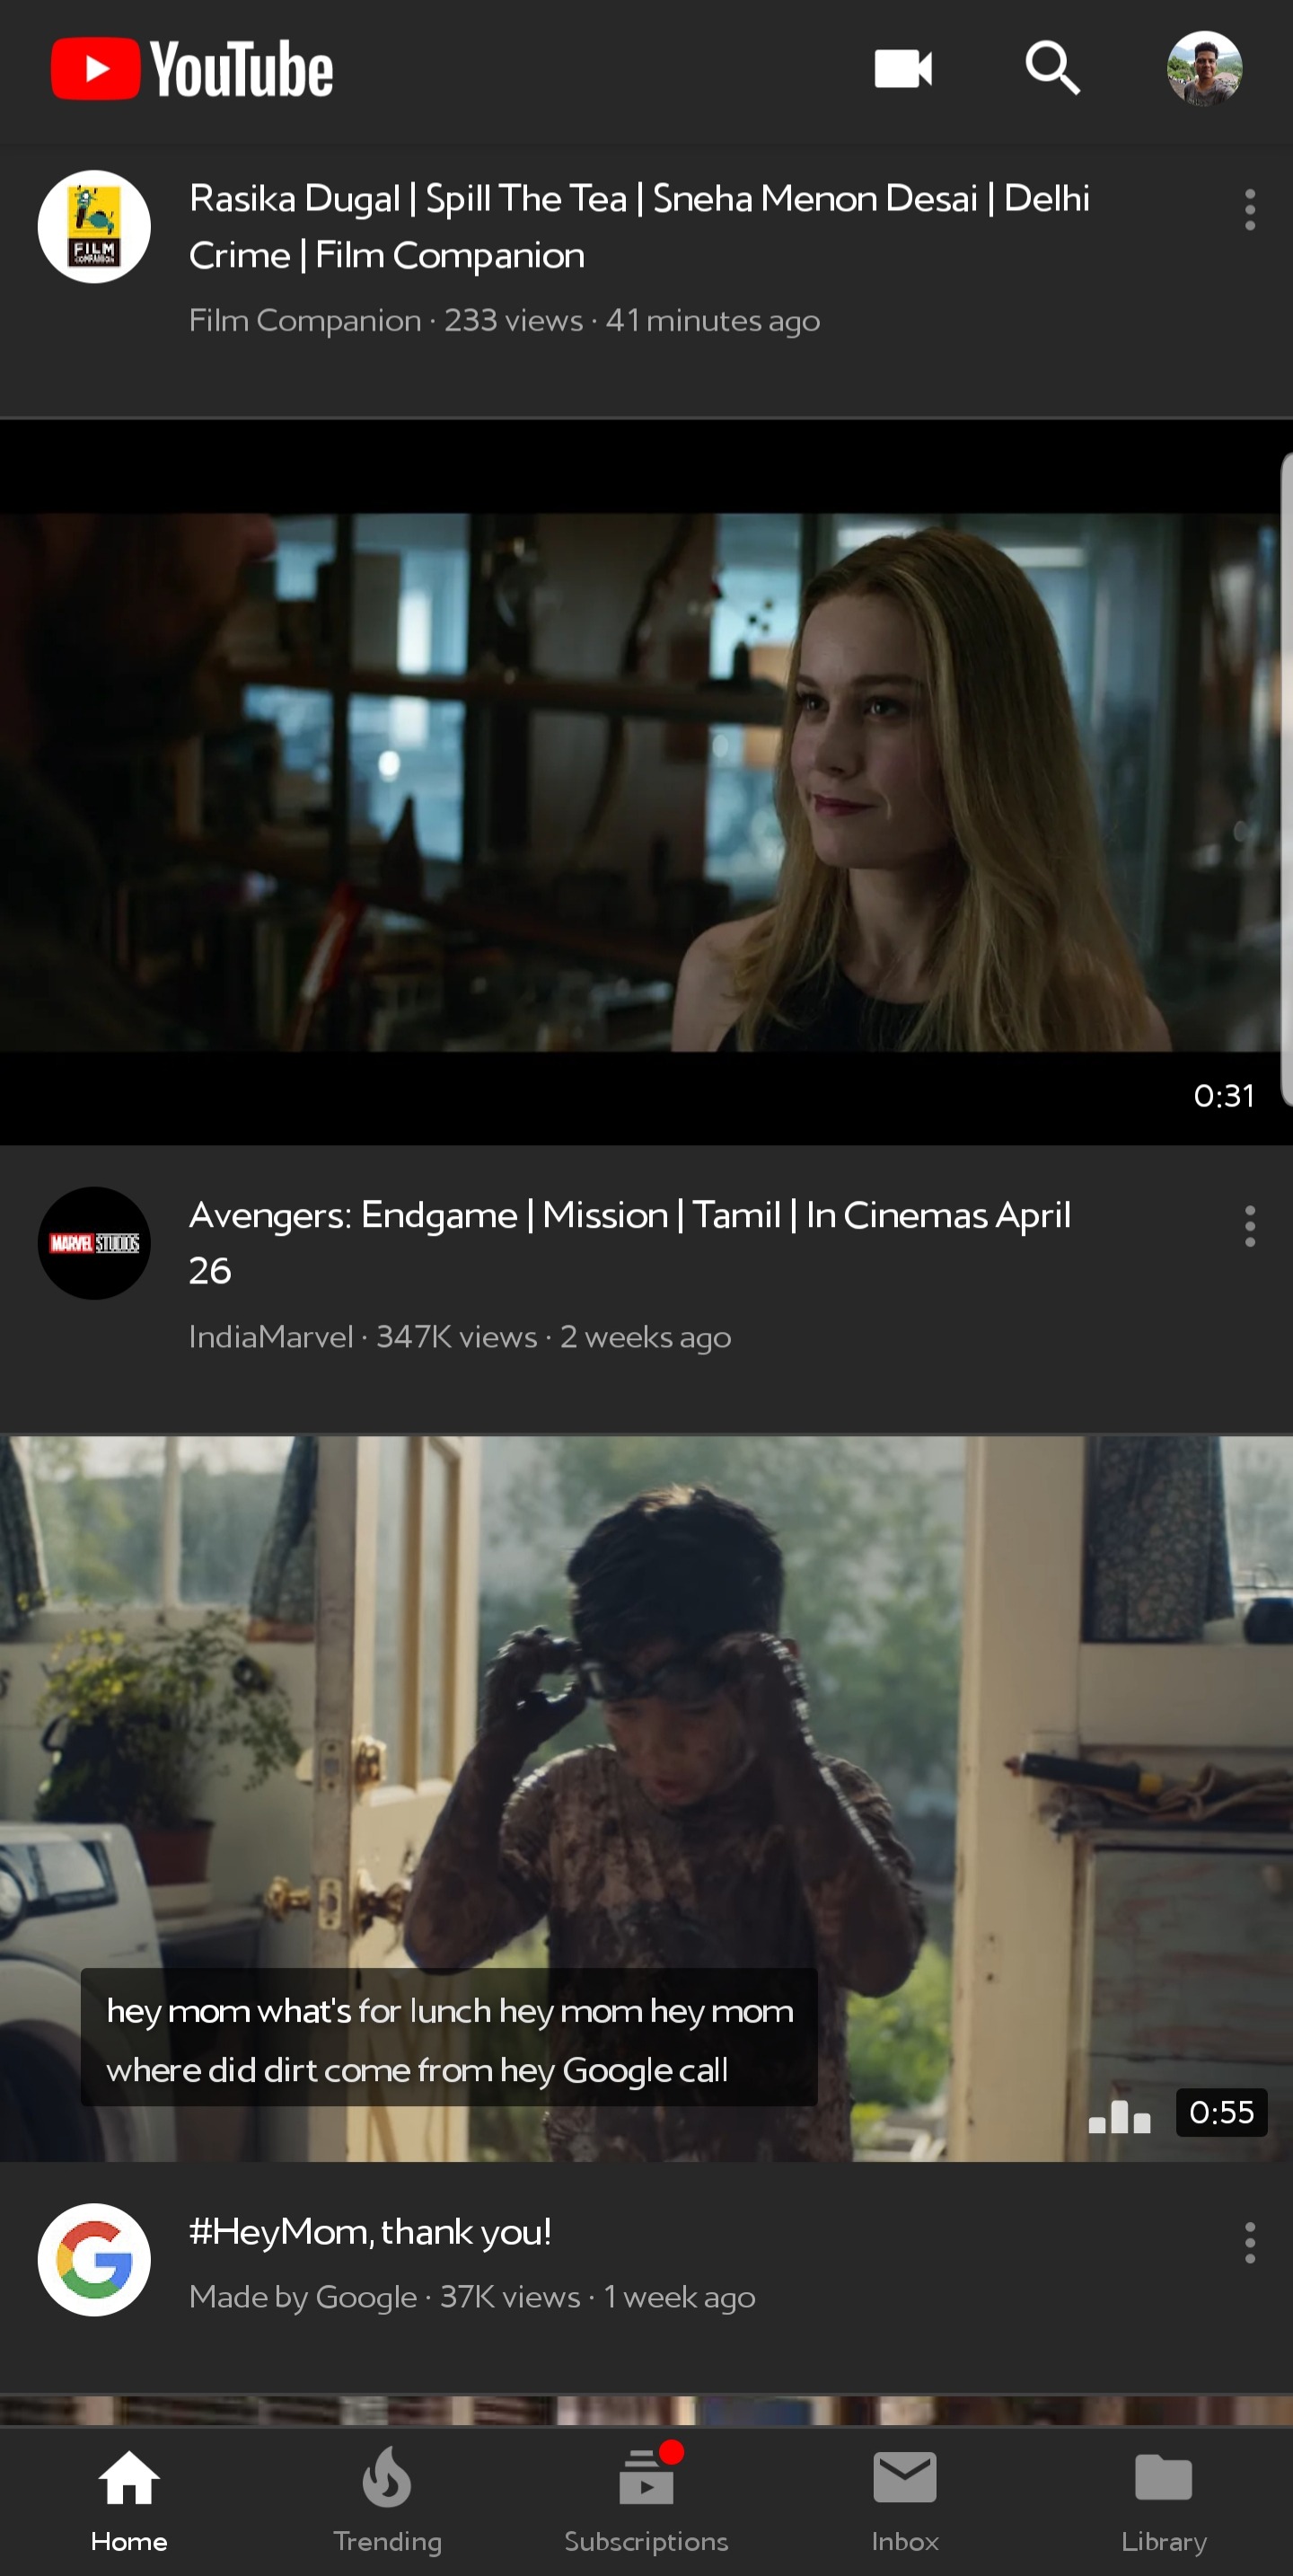 How To Live Stream Videos On YouTube's Android App